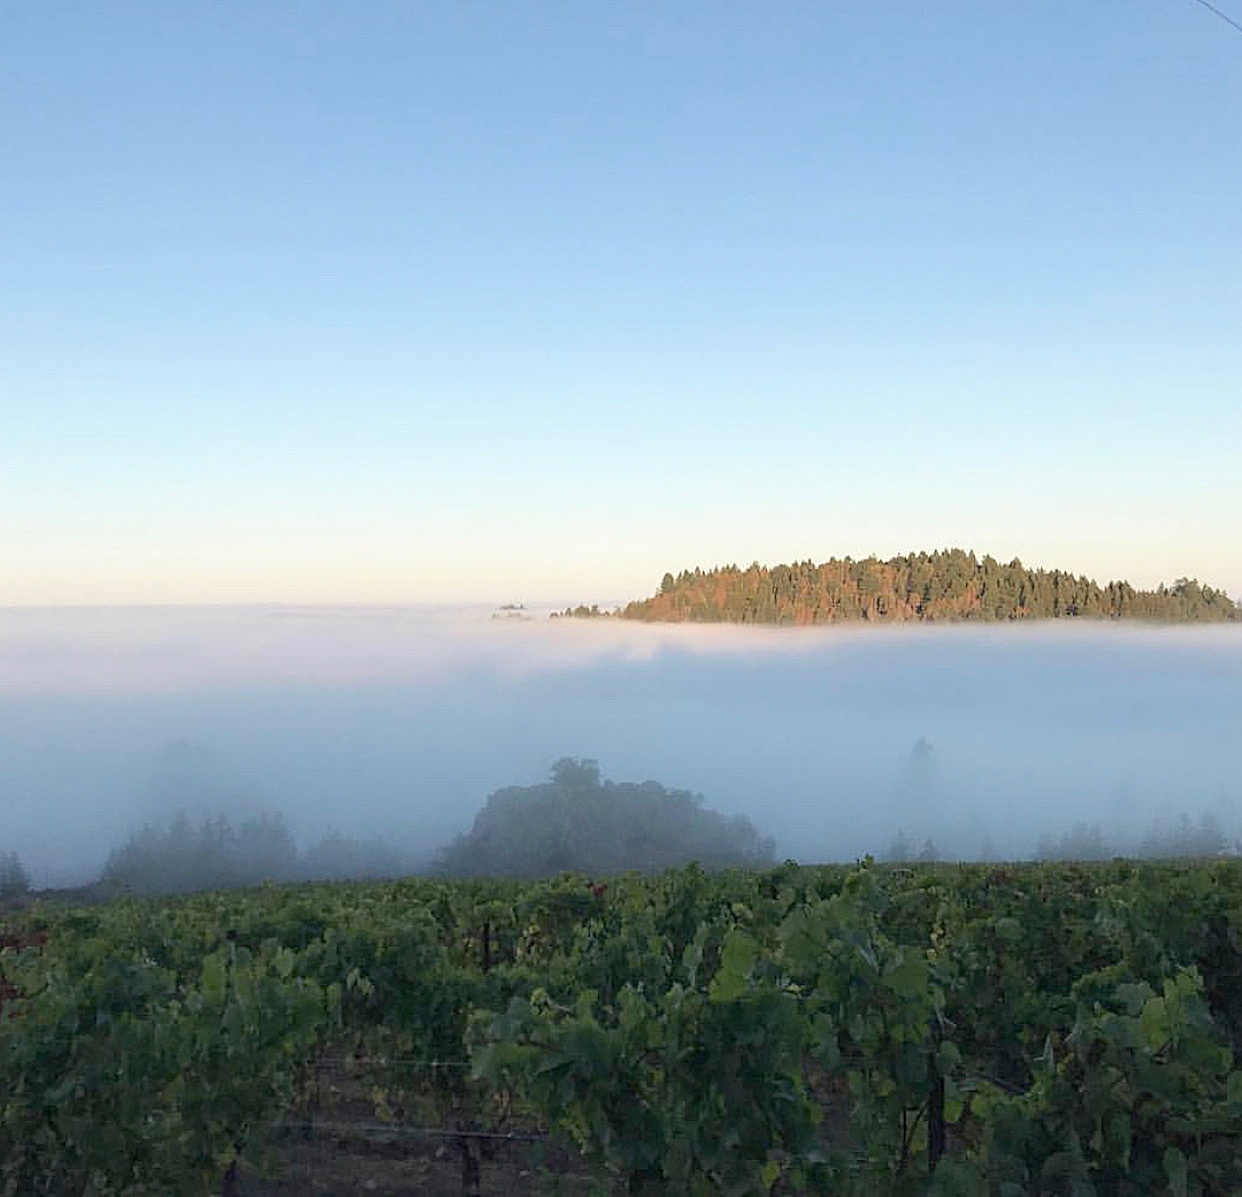 Ross Cobb of Cobb Wines Proves That Harsh Weather Conditions Can Make Beautiful Pinot Noir